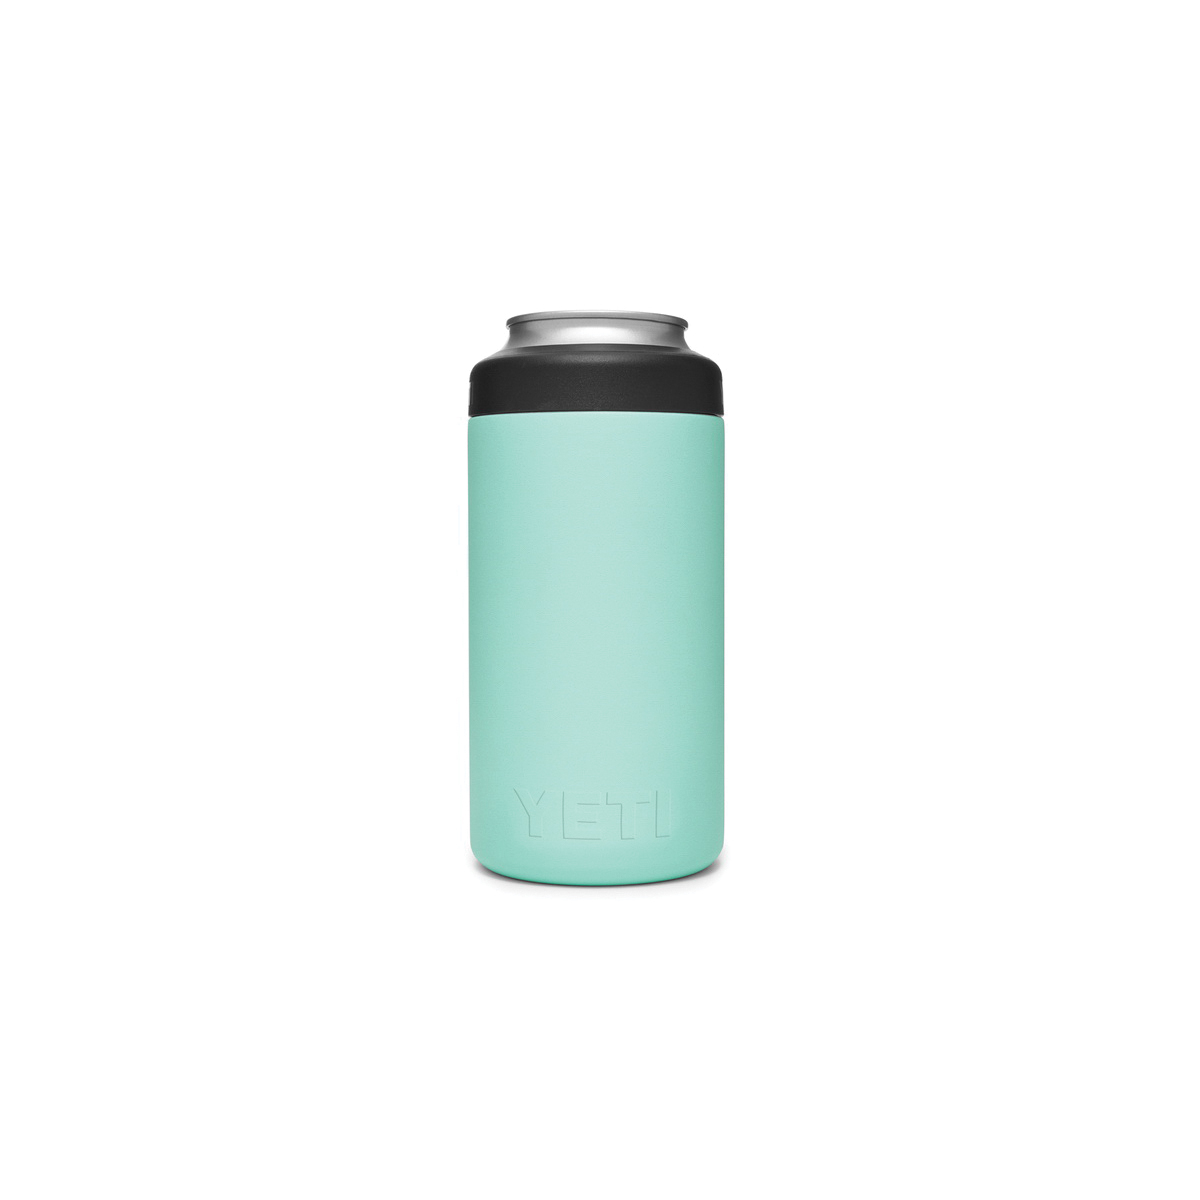 YETI Rambler 21070090050 Colster Can Insulator, 3 in Dia x 6 in H, 16 oz Can/Bottle, Stainless Steel, Seafoam - 2